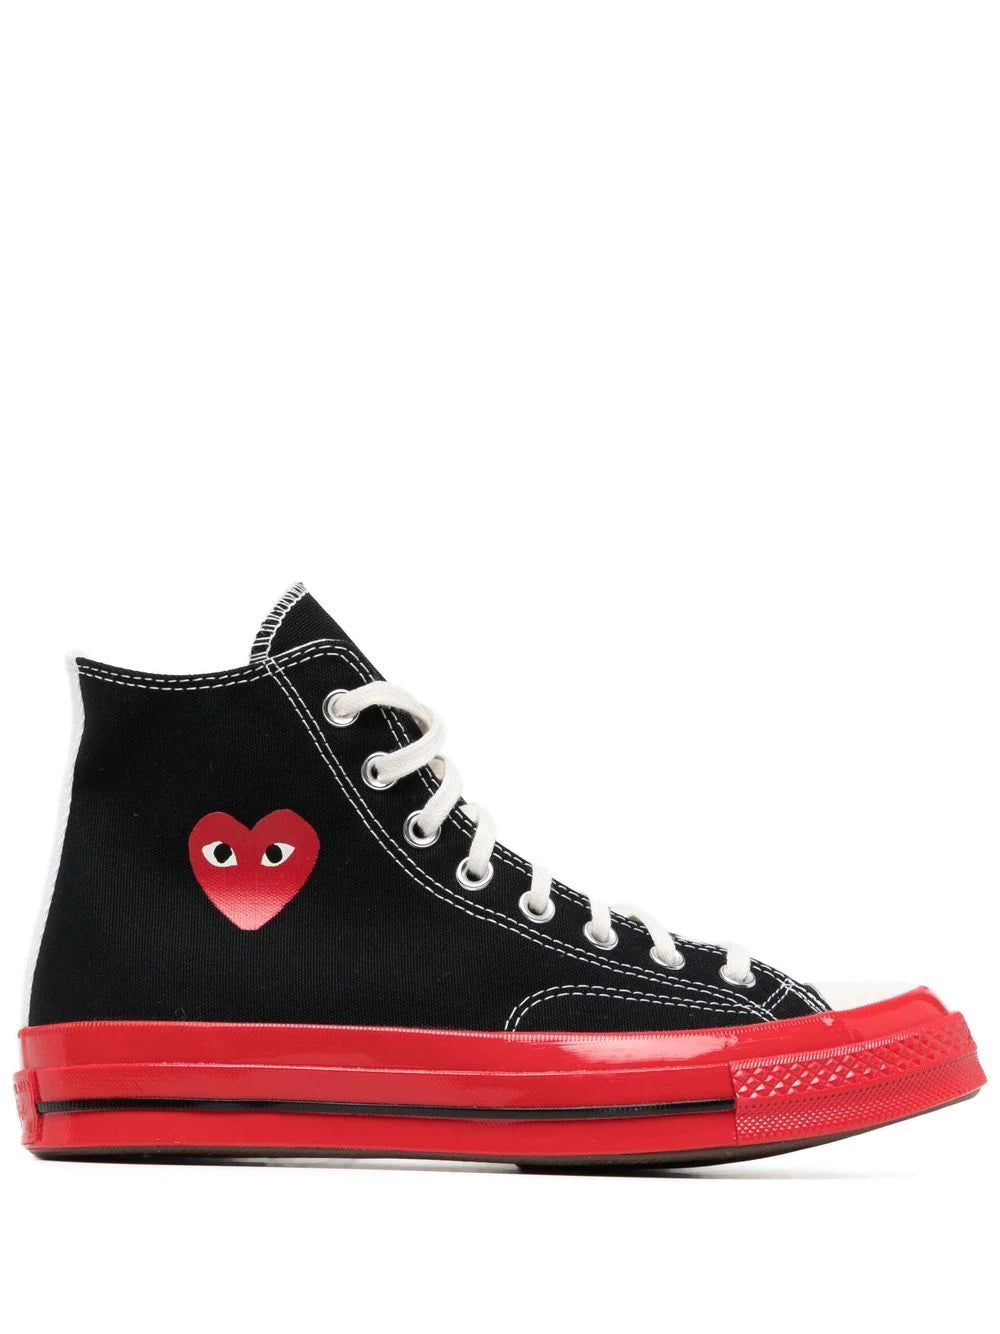 Converse x CDG Play - High 'Chuck Taylor' Sneaker Sole in Black – Vibskov Boutique